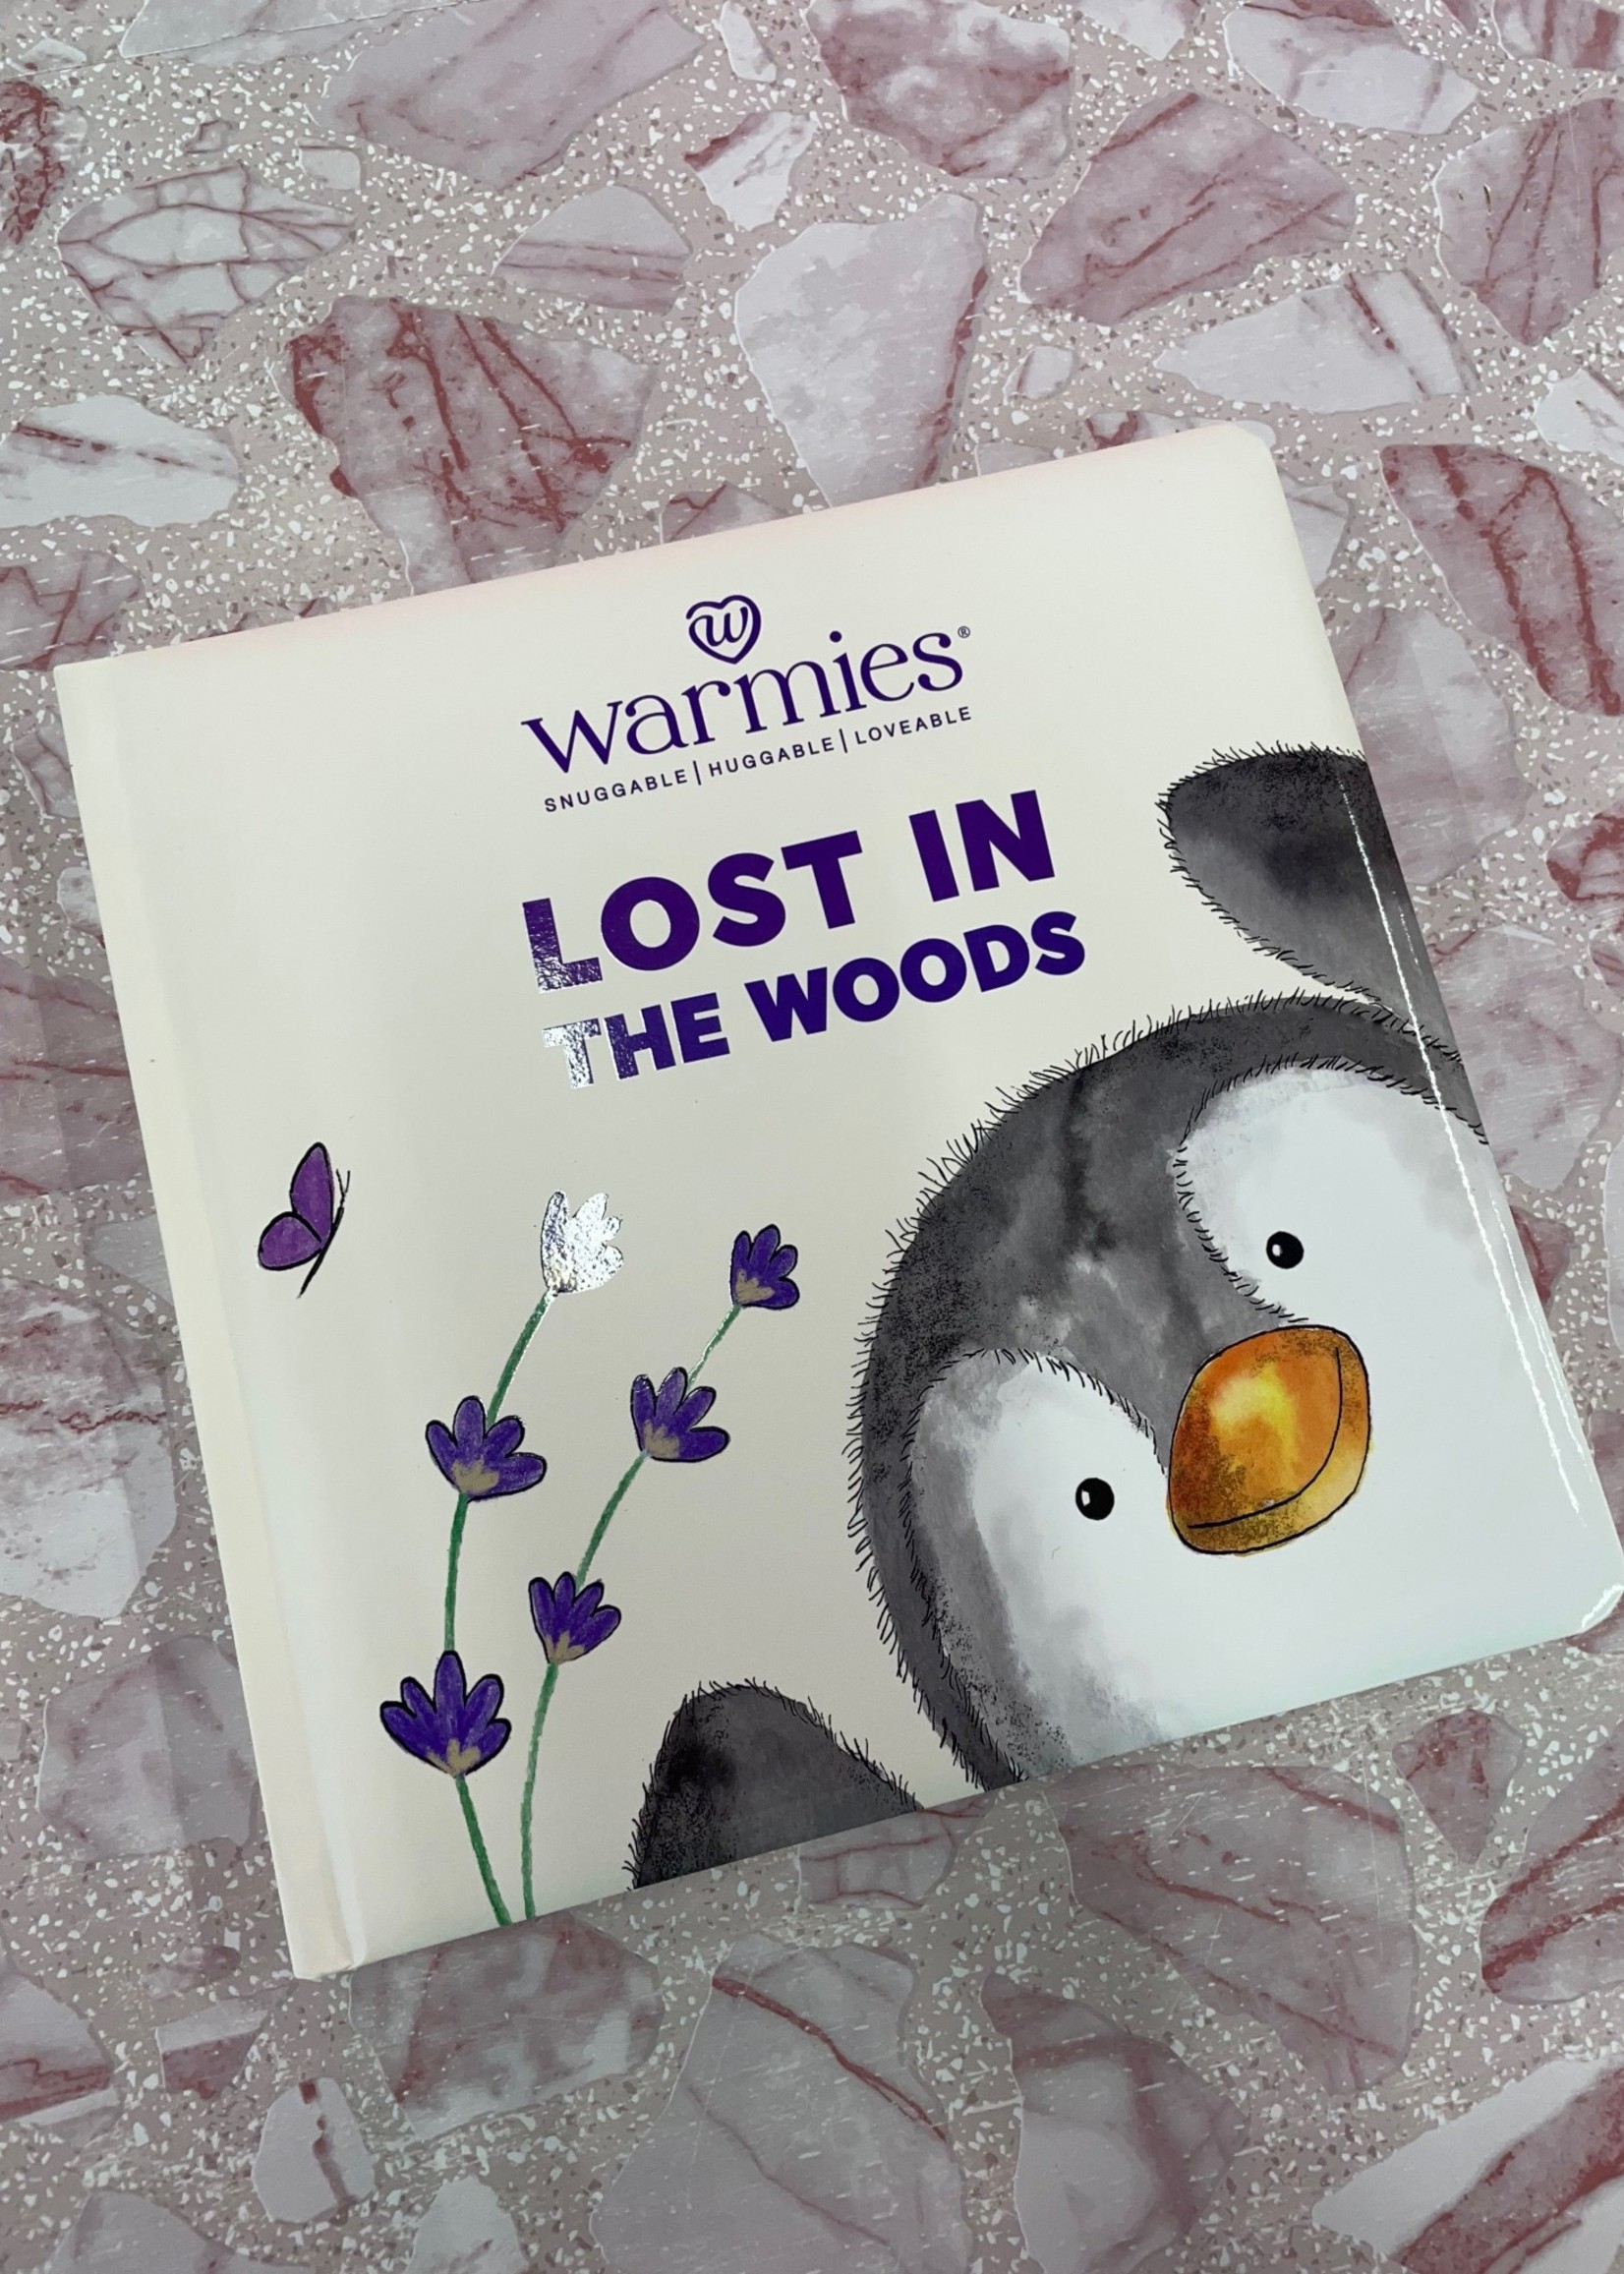 warmies lost in the woods book